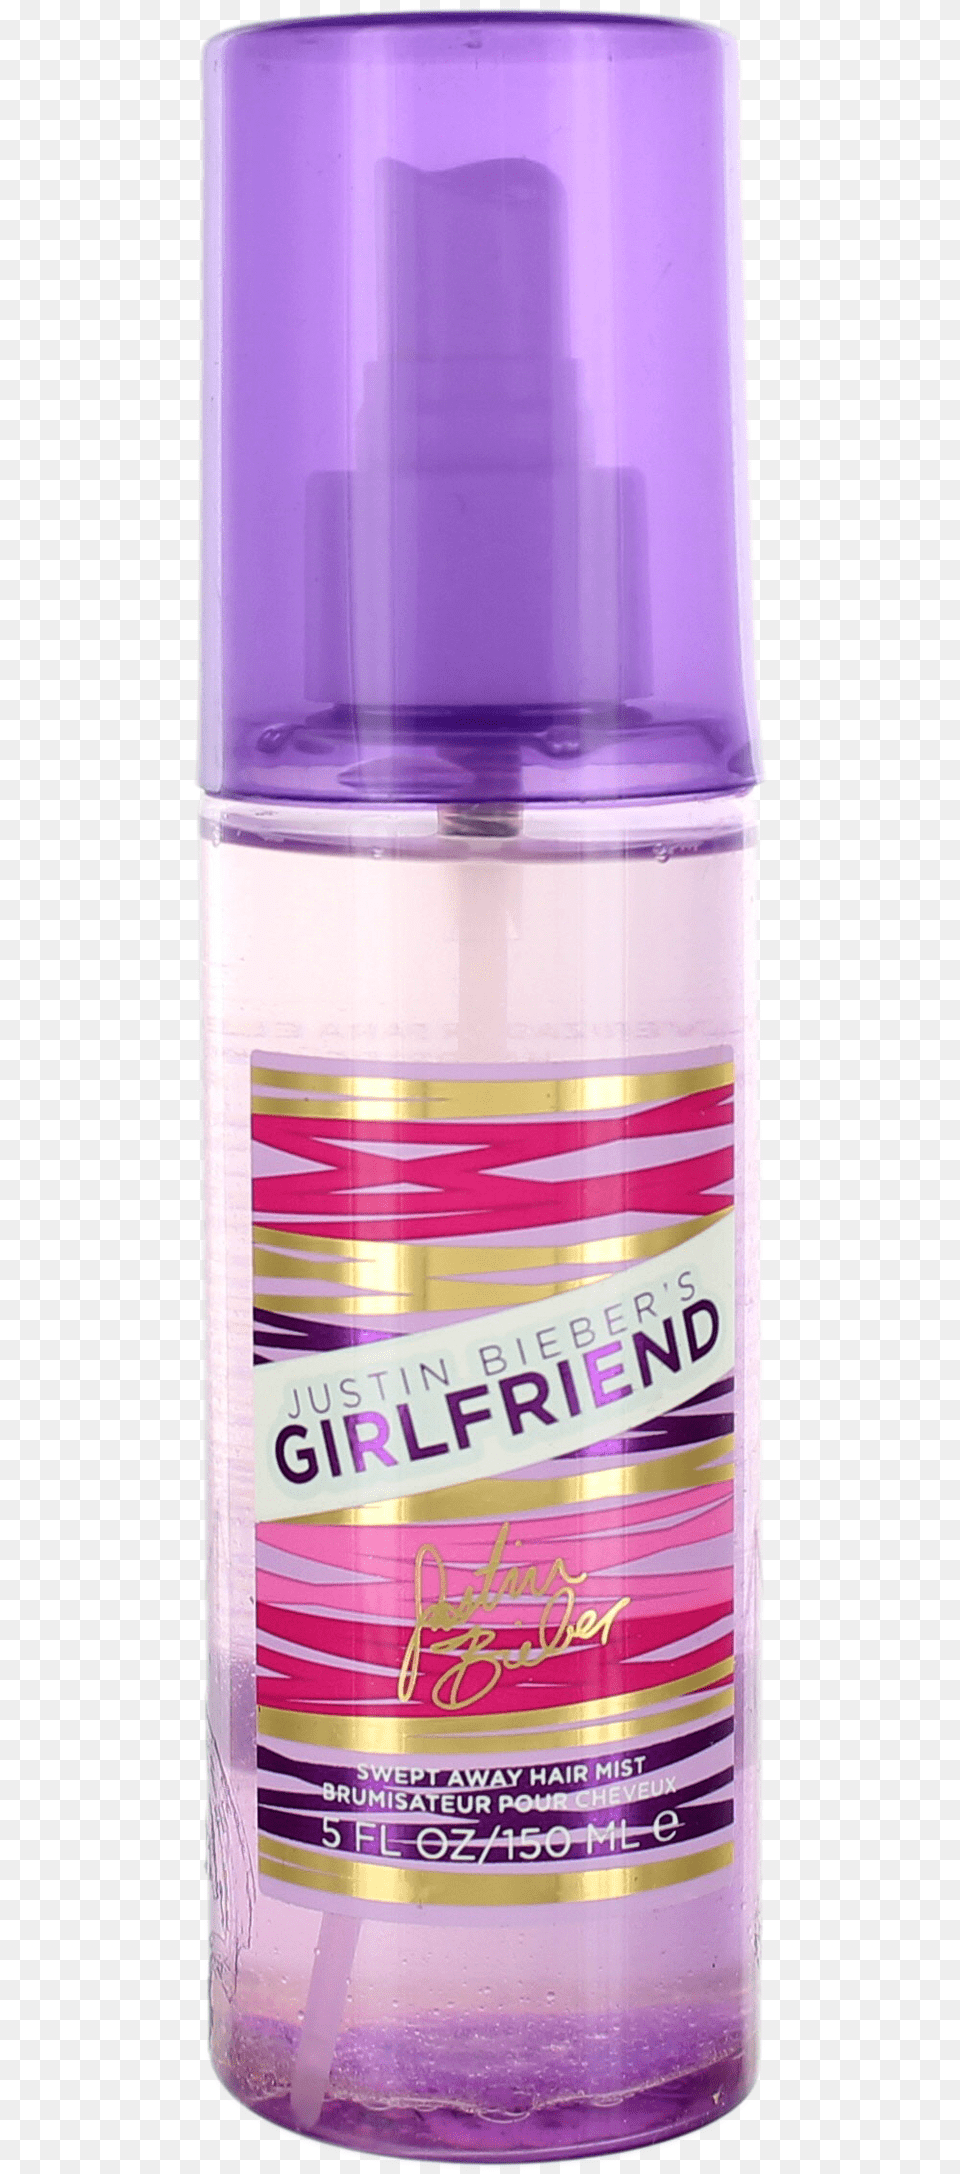 Girlfriend By Justin Bieber For Women Hair Mist Spray Water Bottle, Cosmetics, Deodorant, Alcohol, Beer Png Image